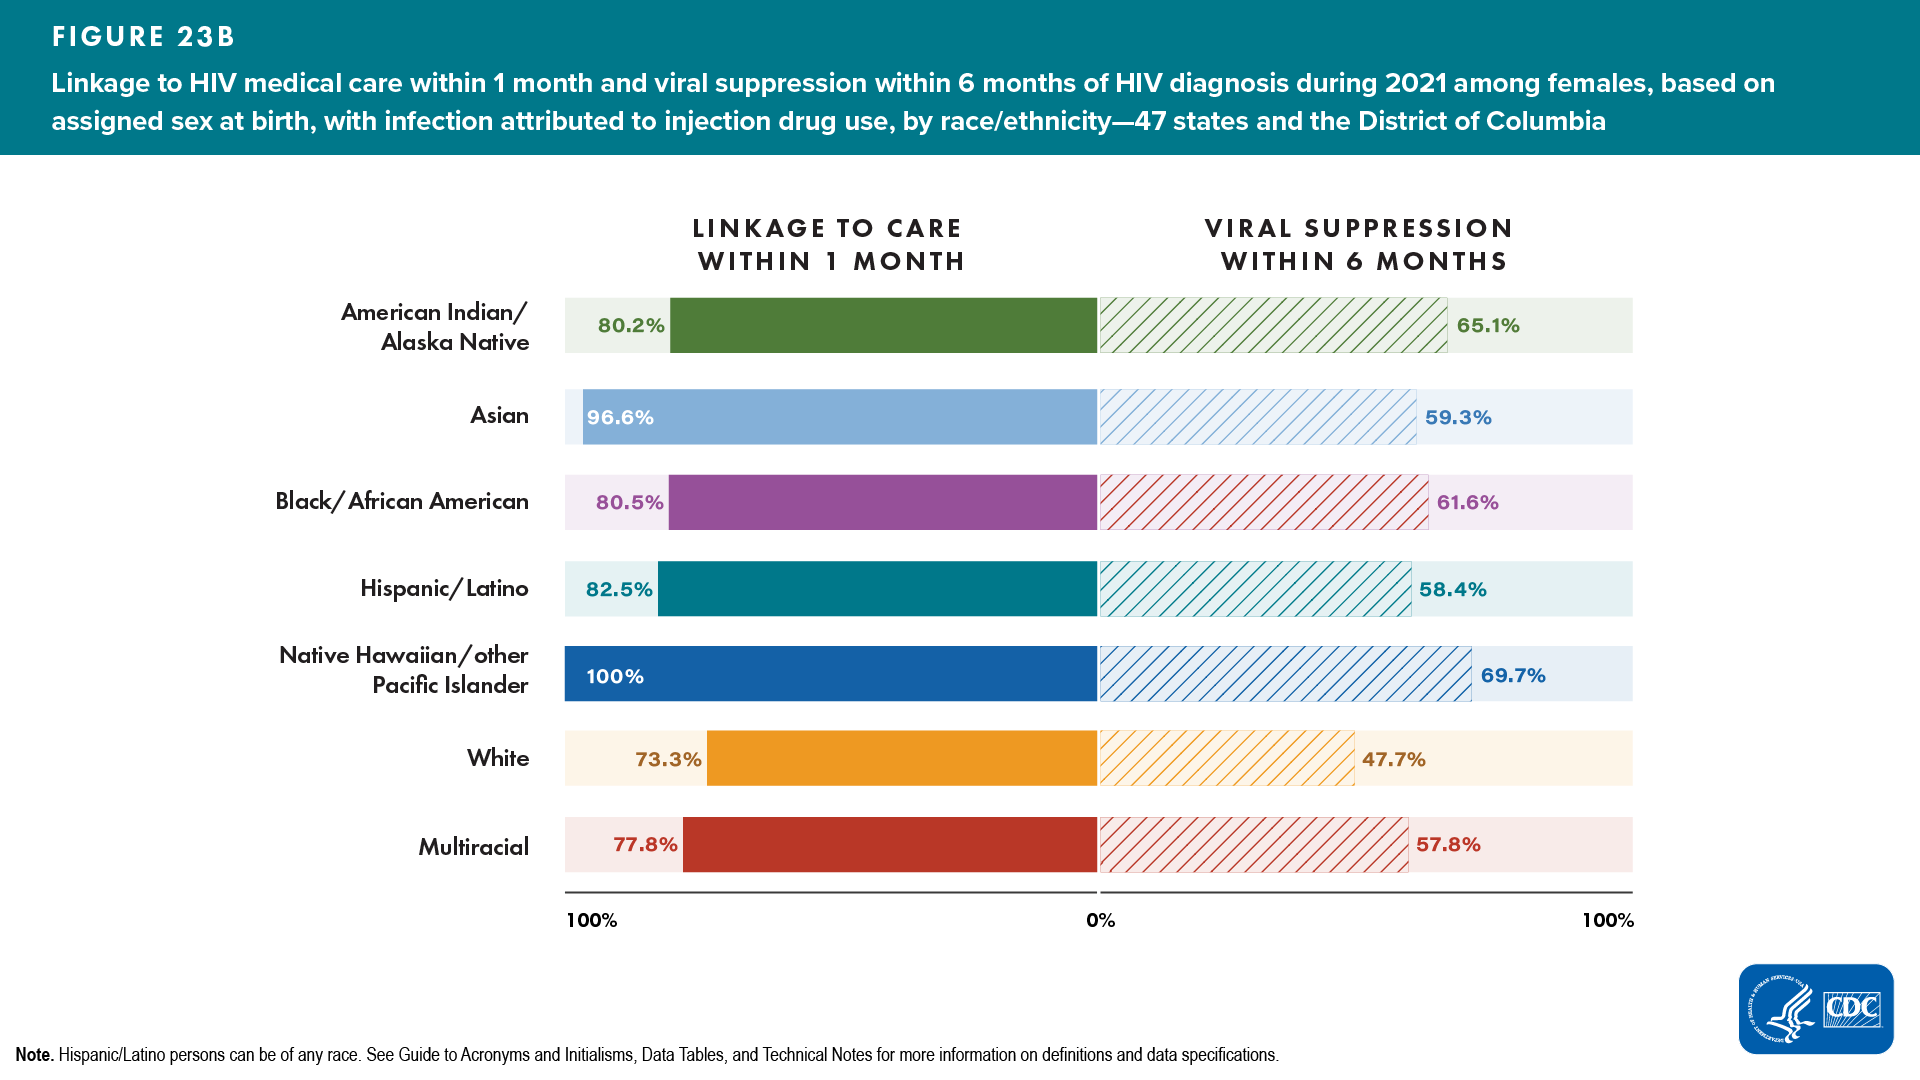 Figure 23b. Linkage to HIV medical care within 1 month and viral suppression within 6 months of HIV diagnosis during 2021 among females, based on assigned sex at birth, with infection attributed to injection drug use, by race/ethnicity — 47 states and the District of Columbia